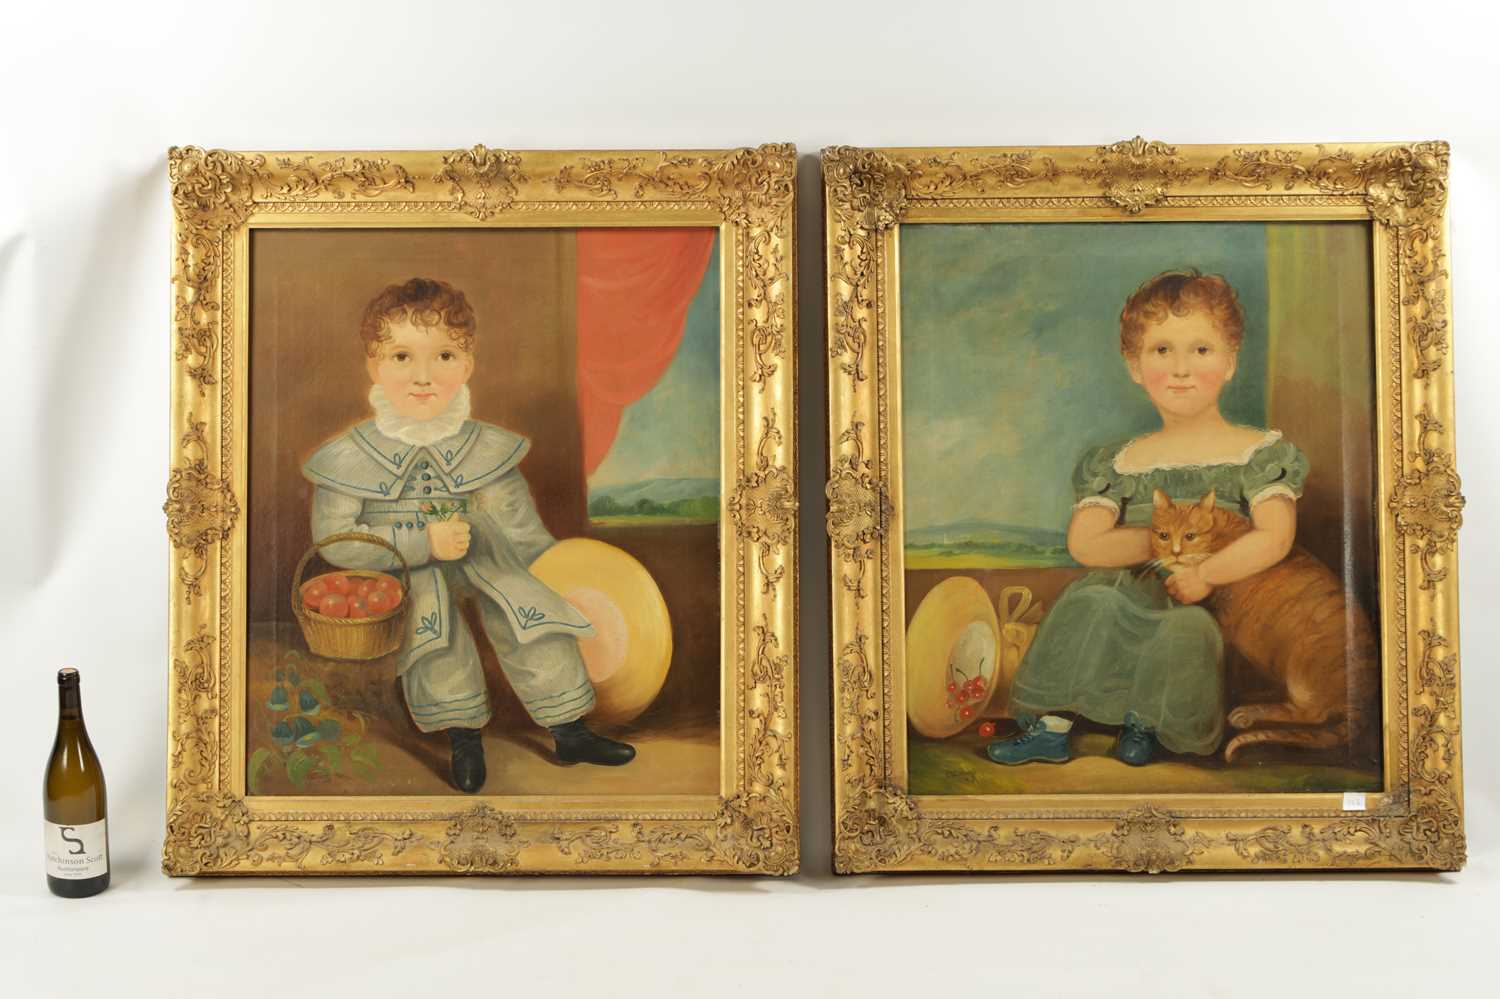 I.B.EATON, A FINE PAIR OF 19TH CENTURY NAIVE SCHOOL FULL LENGTH PORTRAITS OF CHILDREN - Image 2 of 7